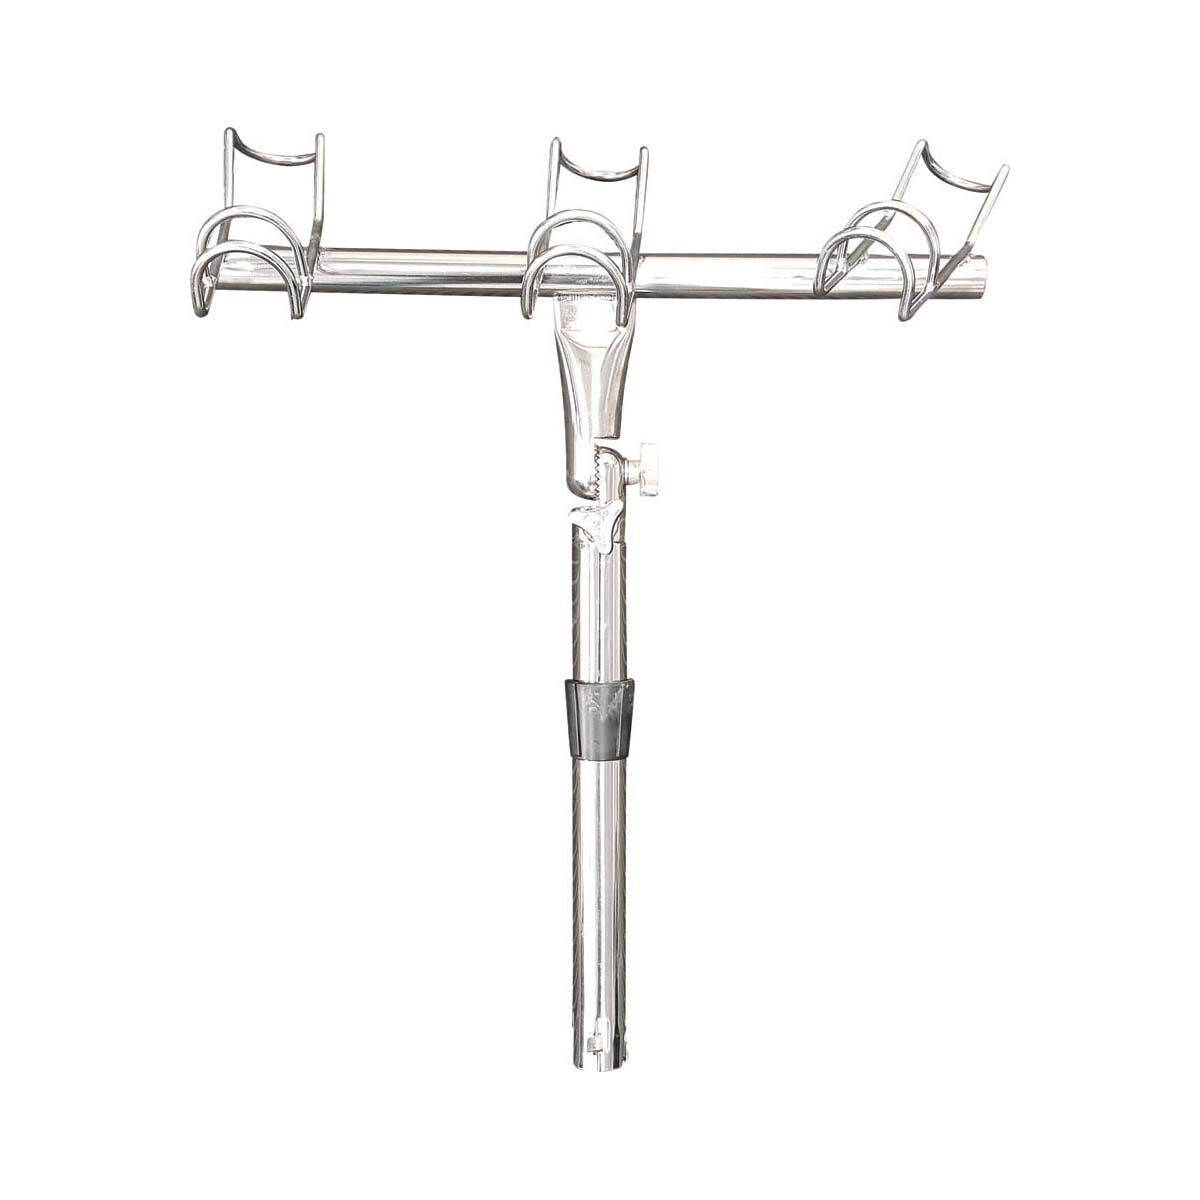 2 Styles 4 Sizes Fishing Rod Stand Pole Holder Plug Insert Ground Portable  Stainless Steel Tools Tackle Support Telescopic Rack